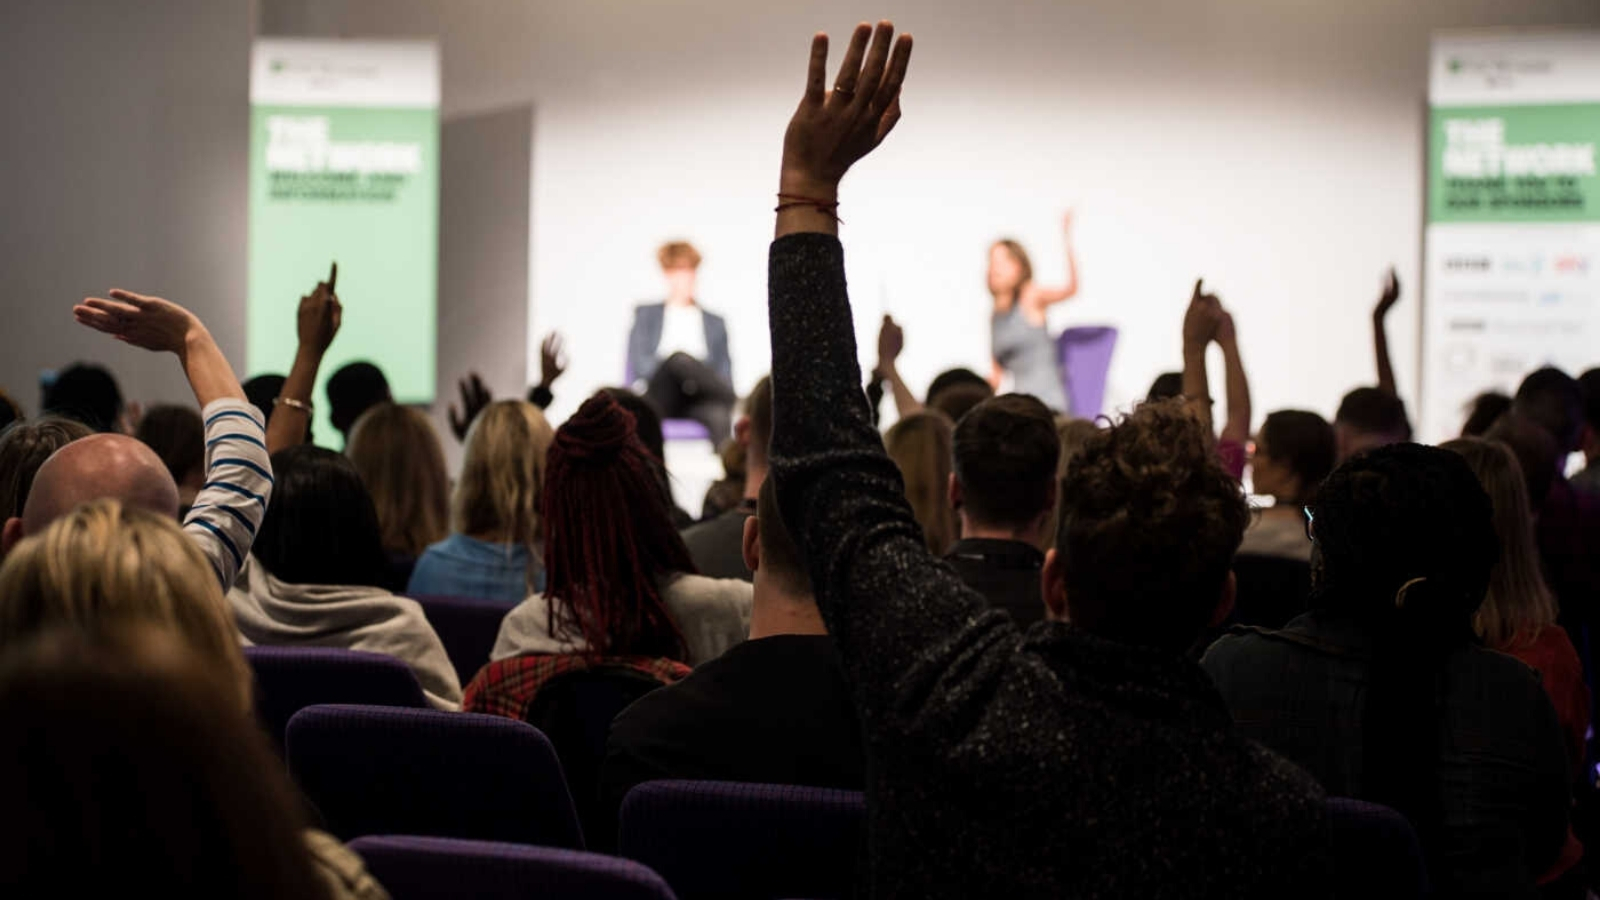 People in the audience at a conference or event putting their hands up to ask questions